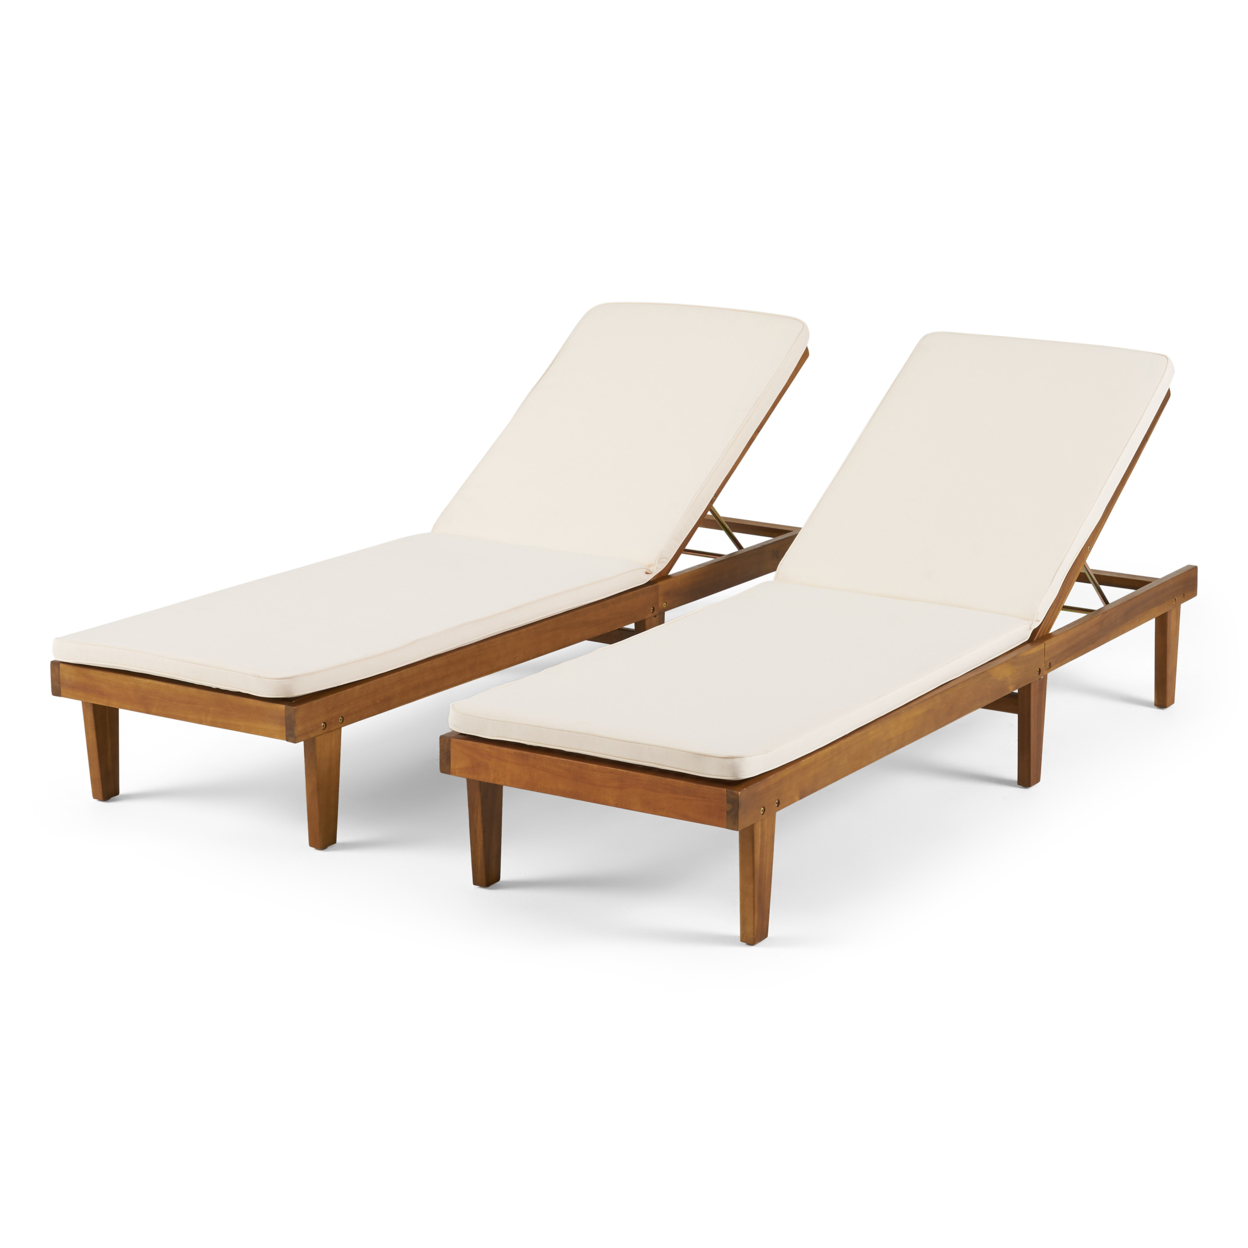 Madge Oudoor Modern Acacia Wood Chaise Lounge With Cushion (Set Of 2) - Gray Finish + Rust Orange